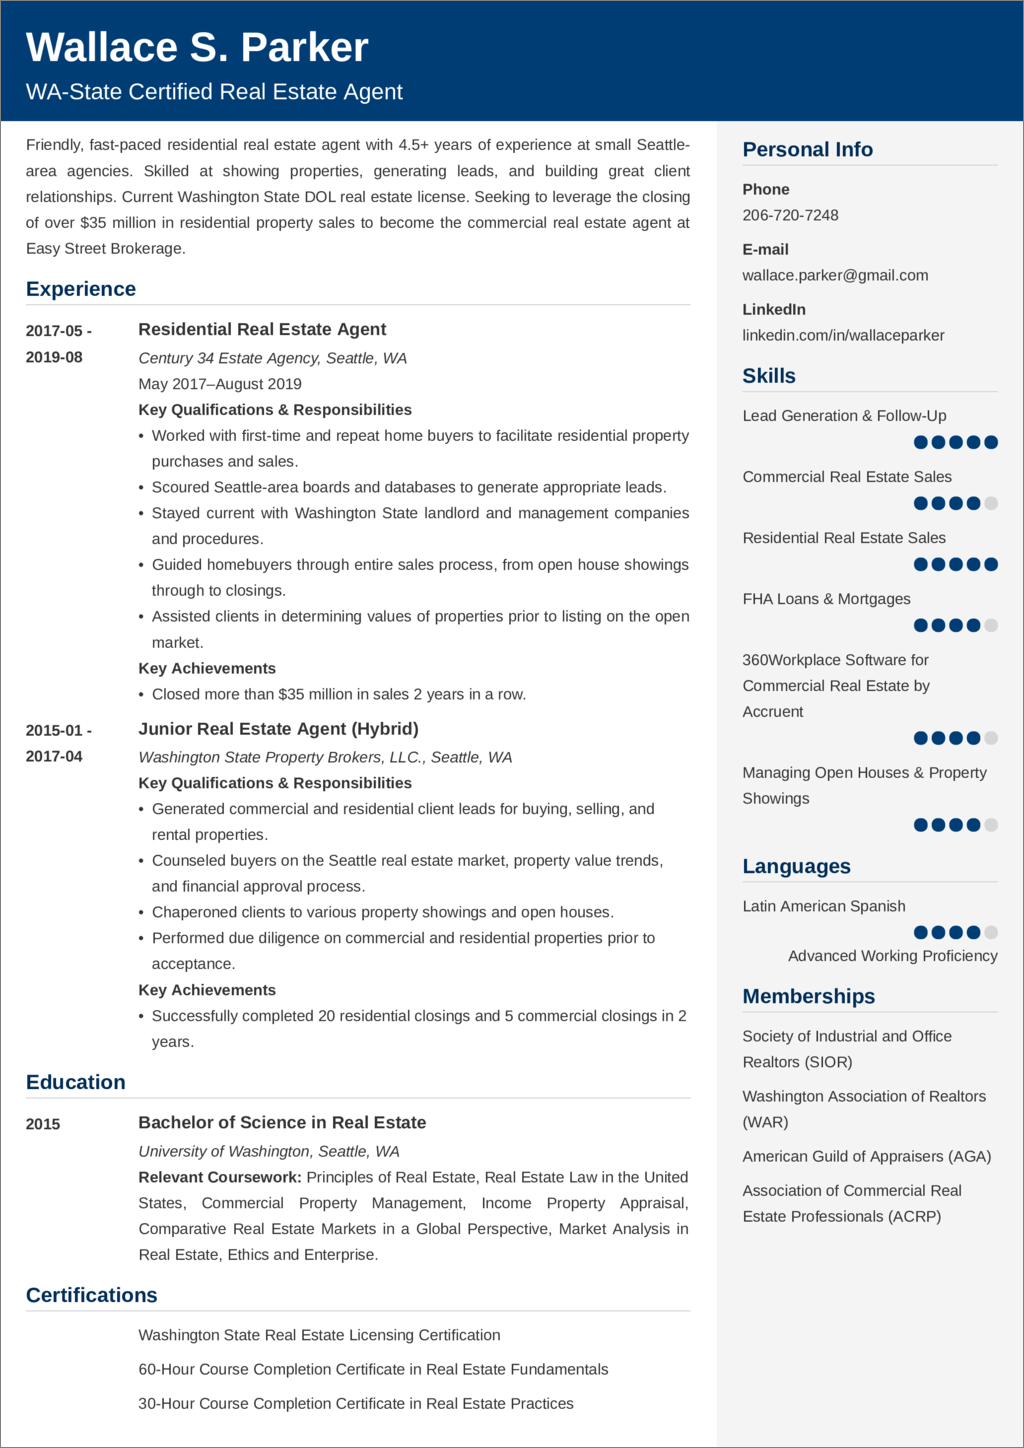 Real Estate Resume Example with Job Description & Skills